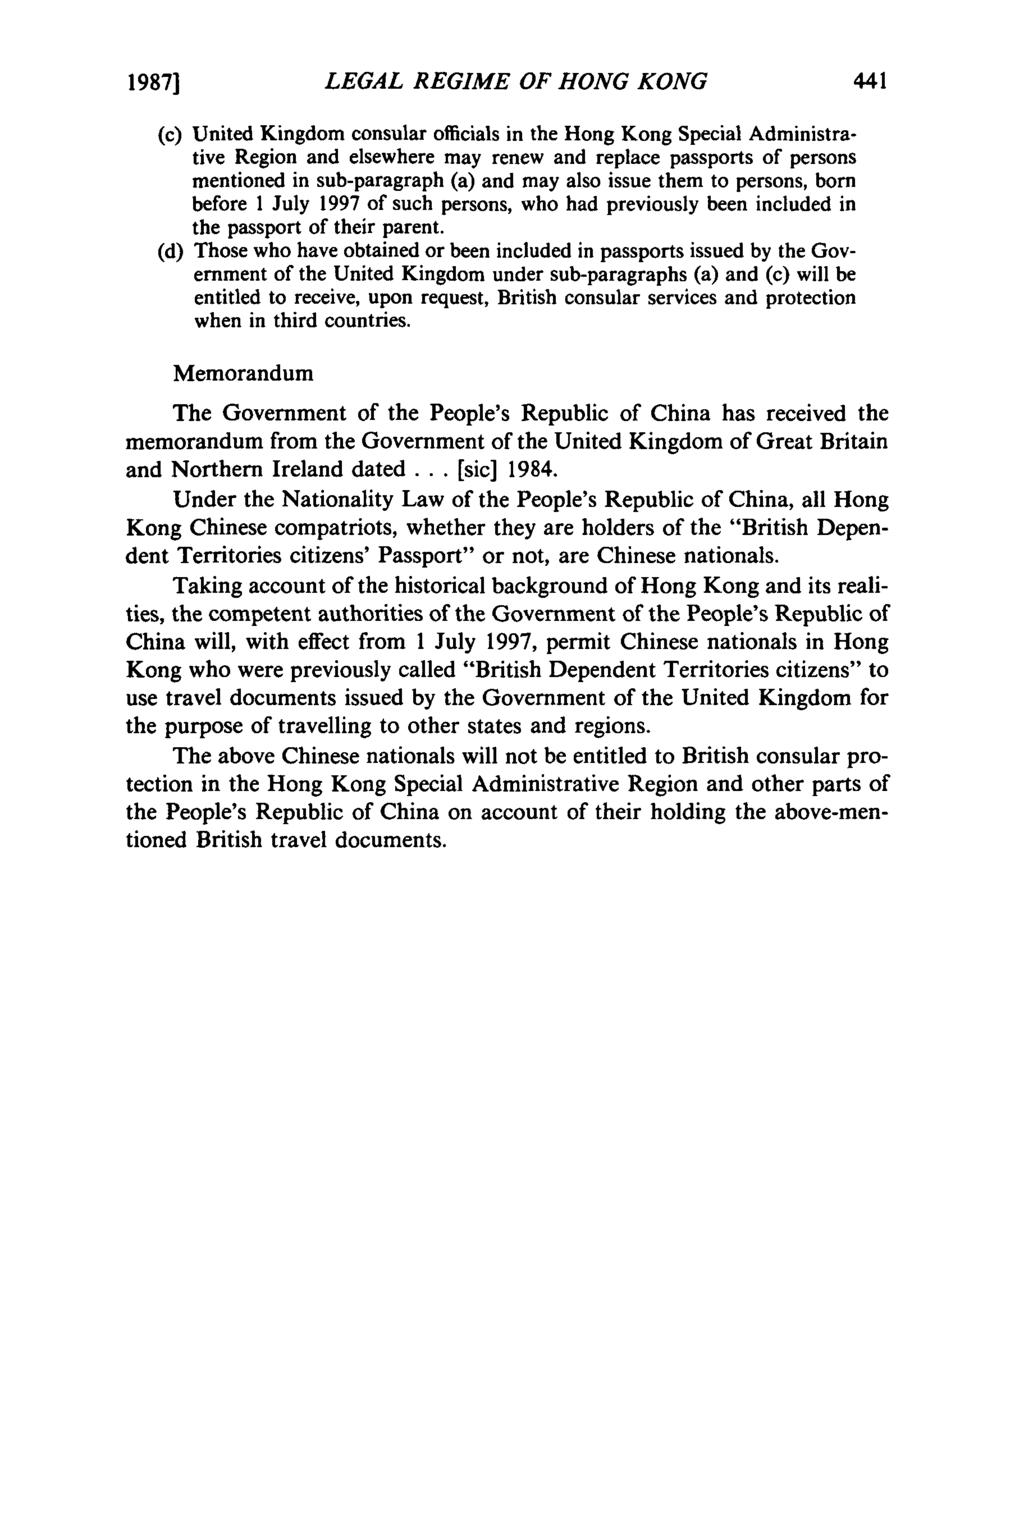 1987] LEGAL REGIME OF HONG KONG (c) United Kingdom consular officials in the Hong Kong Special Administrative Region and elsewhere may renew and replace passports of persons mentioned in